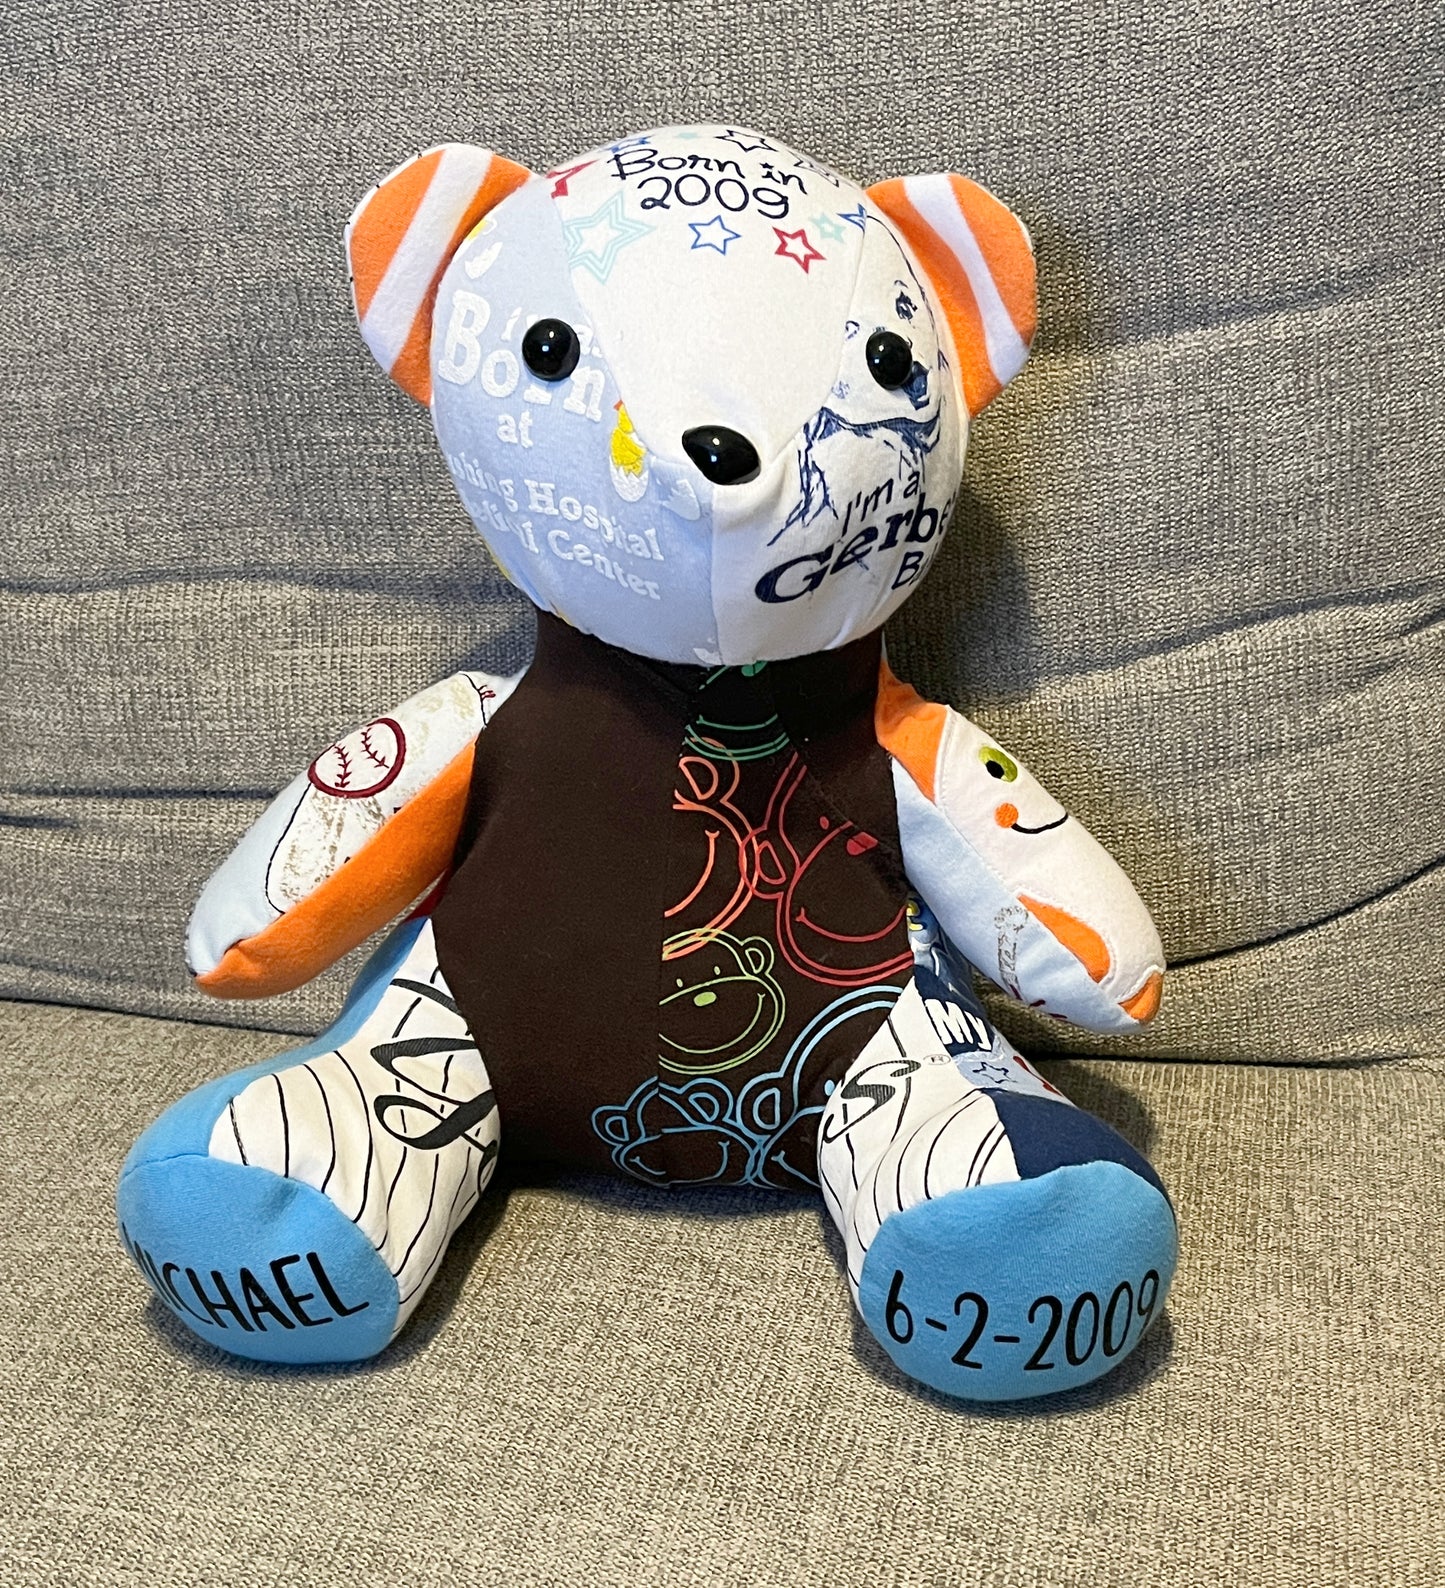 memory bear made from baby clothes, showing the name & birthday add on